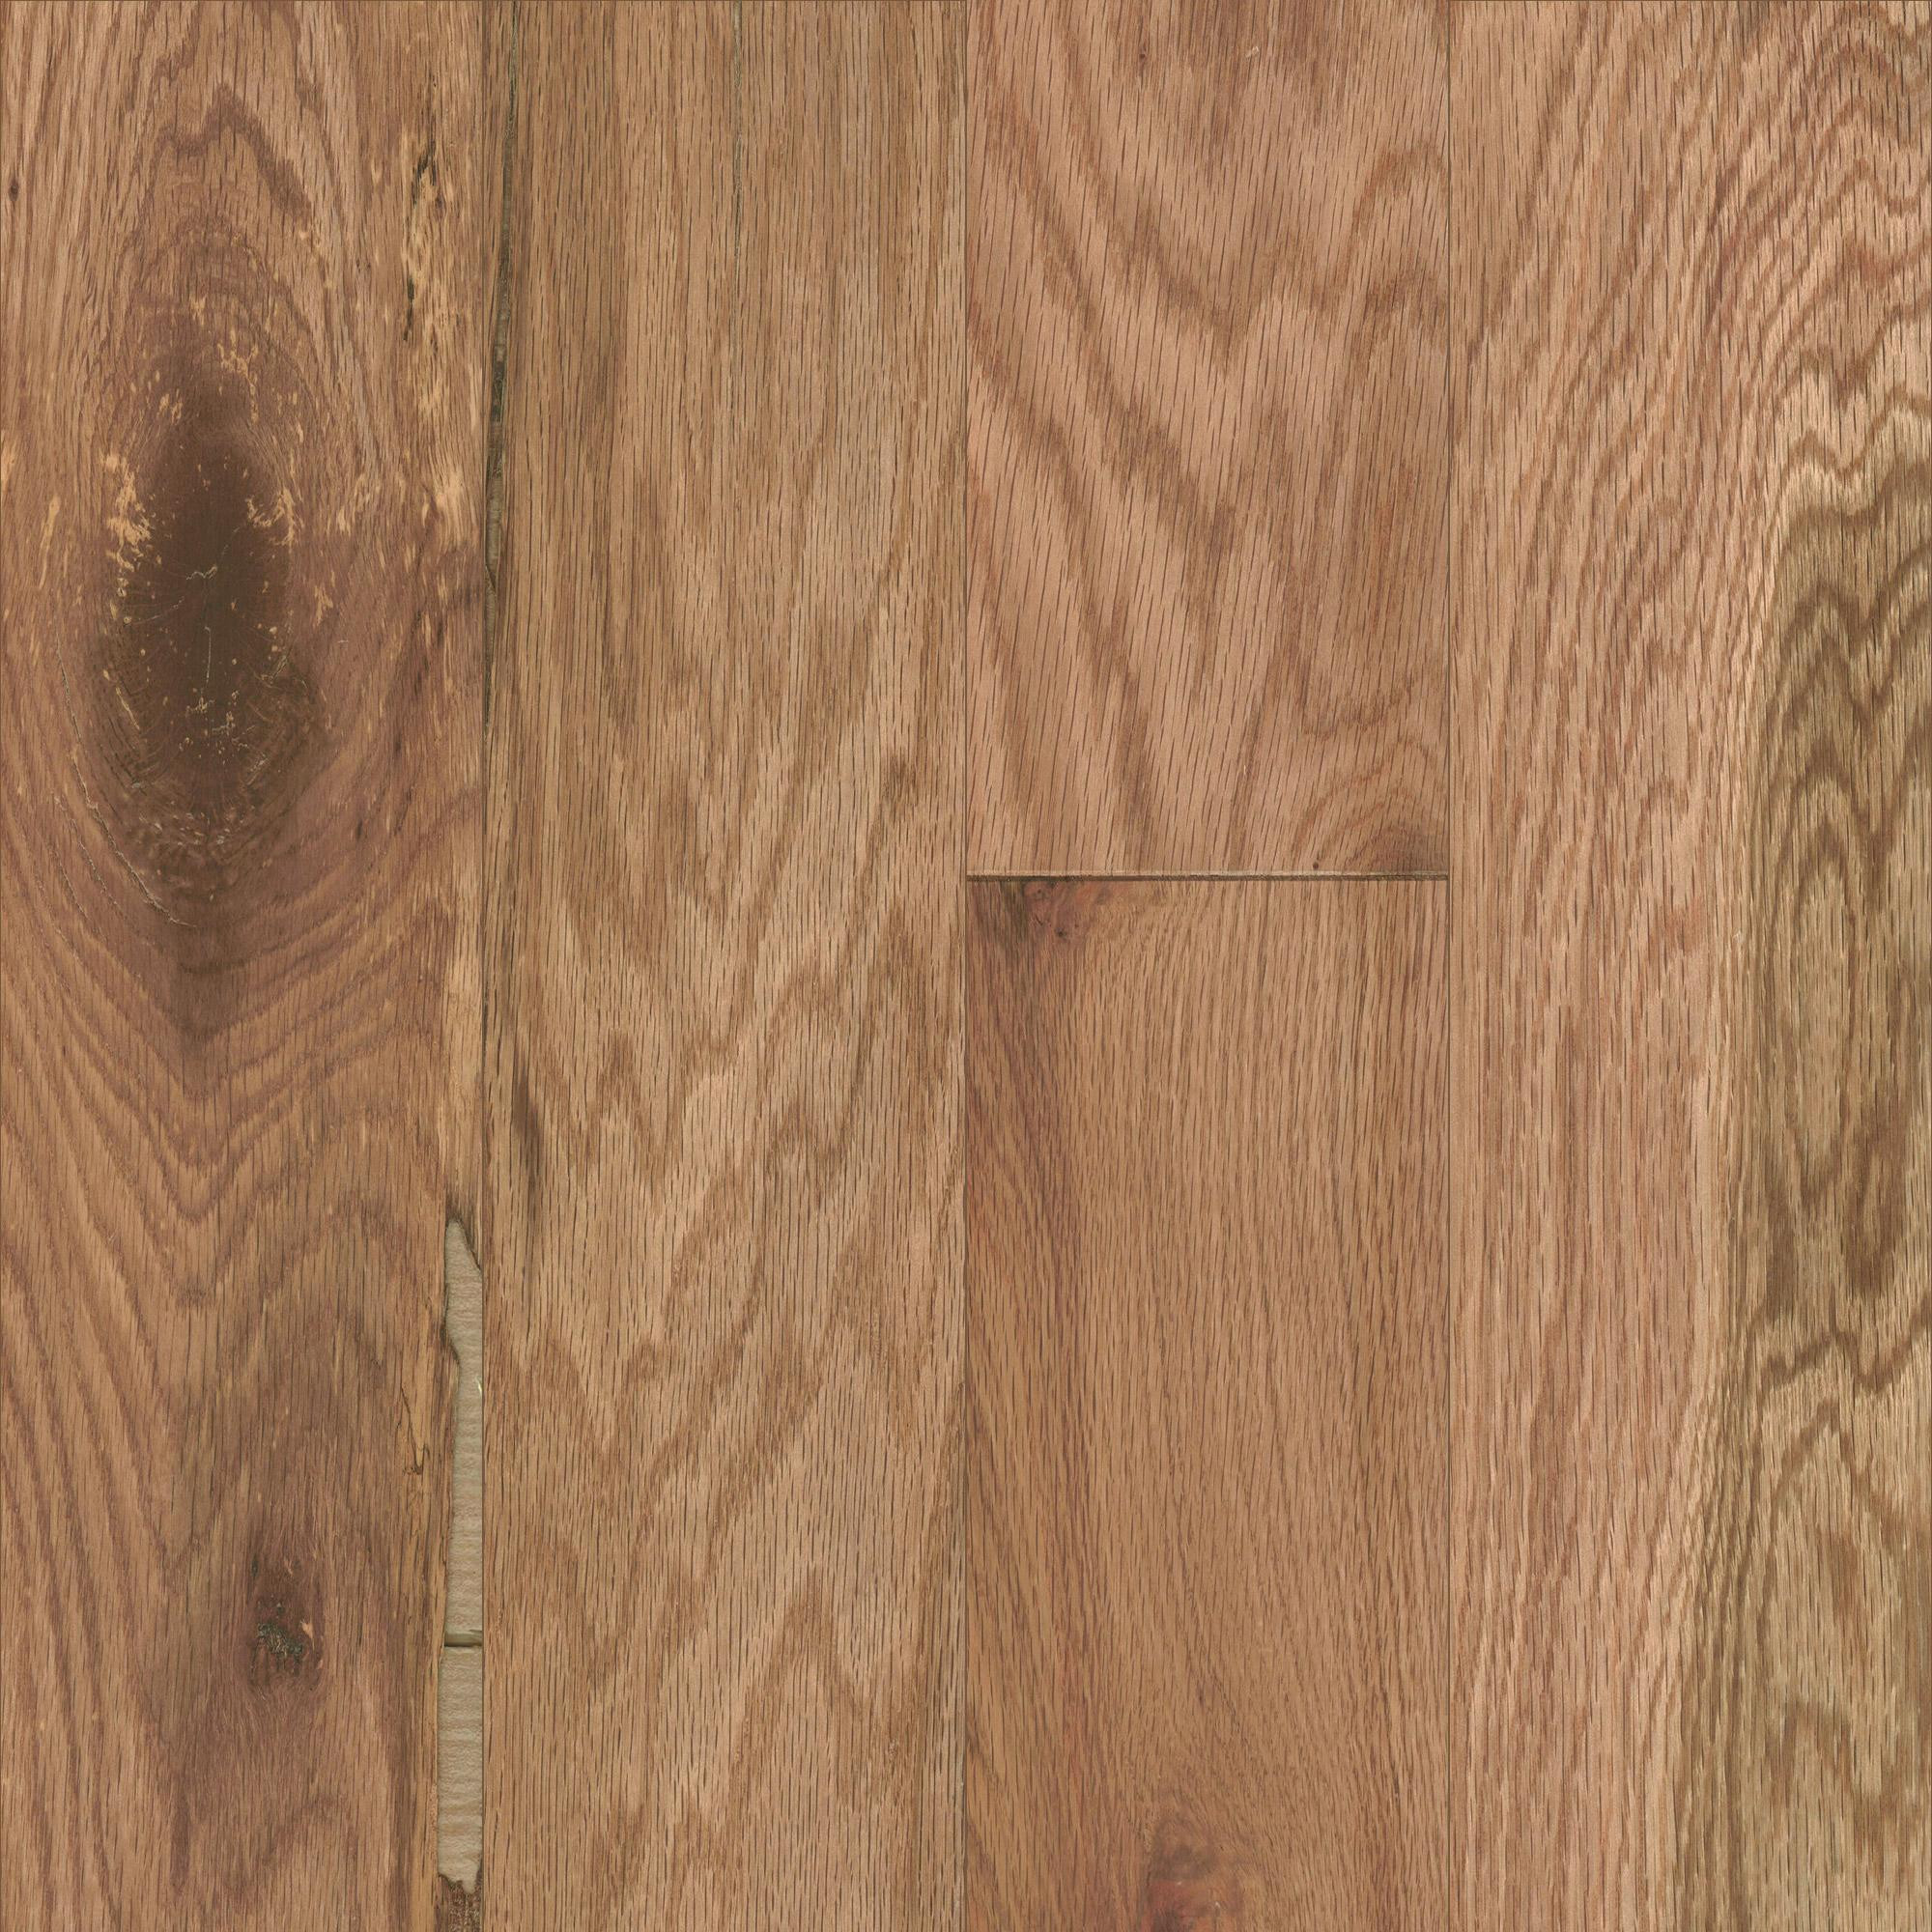 15 Awesome 3 4 Vs 1 2 Inch Engineered Hardwood Flooring 2024 free download 3 4 vs 1 2 inch engineered hardwood flooring of mullican ridgecrest red oak natural 1 2 thick 5 wide engineered in mullican ridgecrest red oak natural 1 2 thick 5 wide engineered hardwood fl